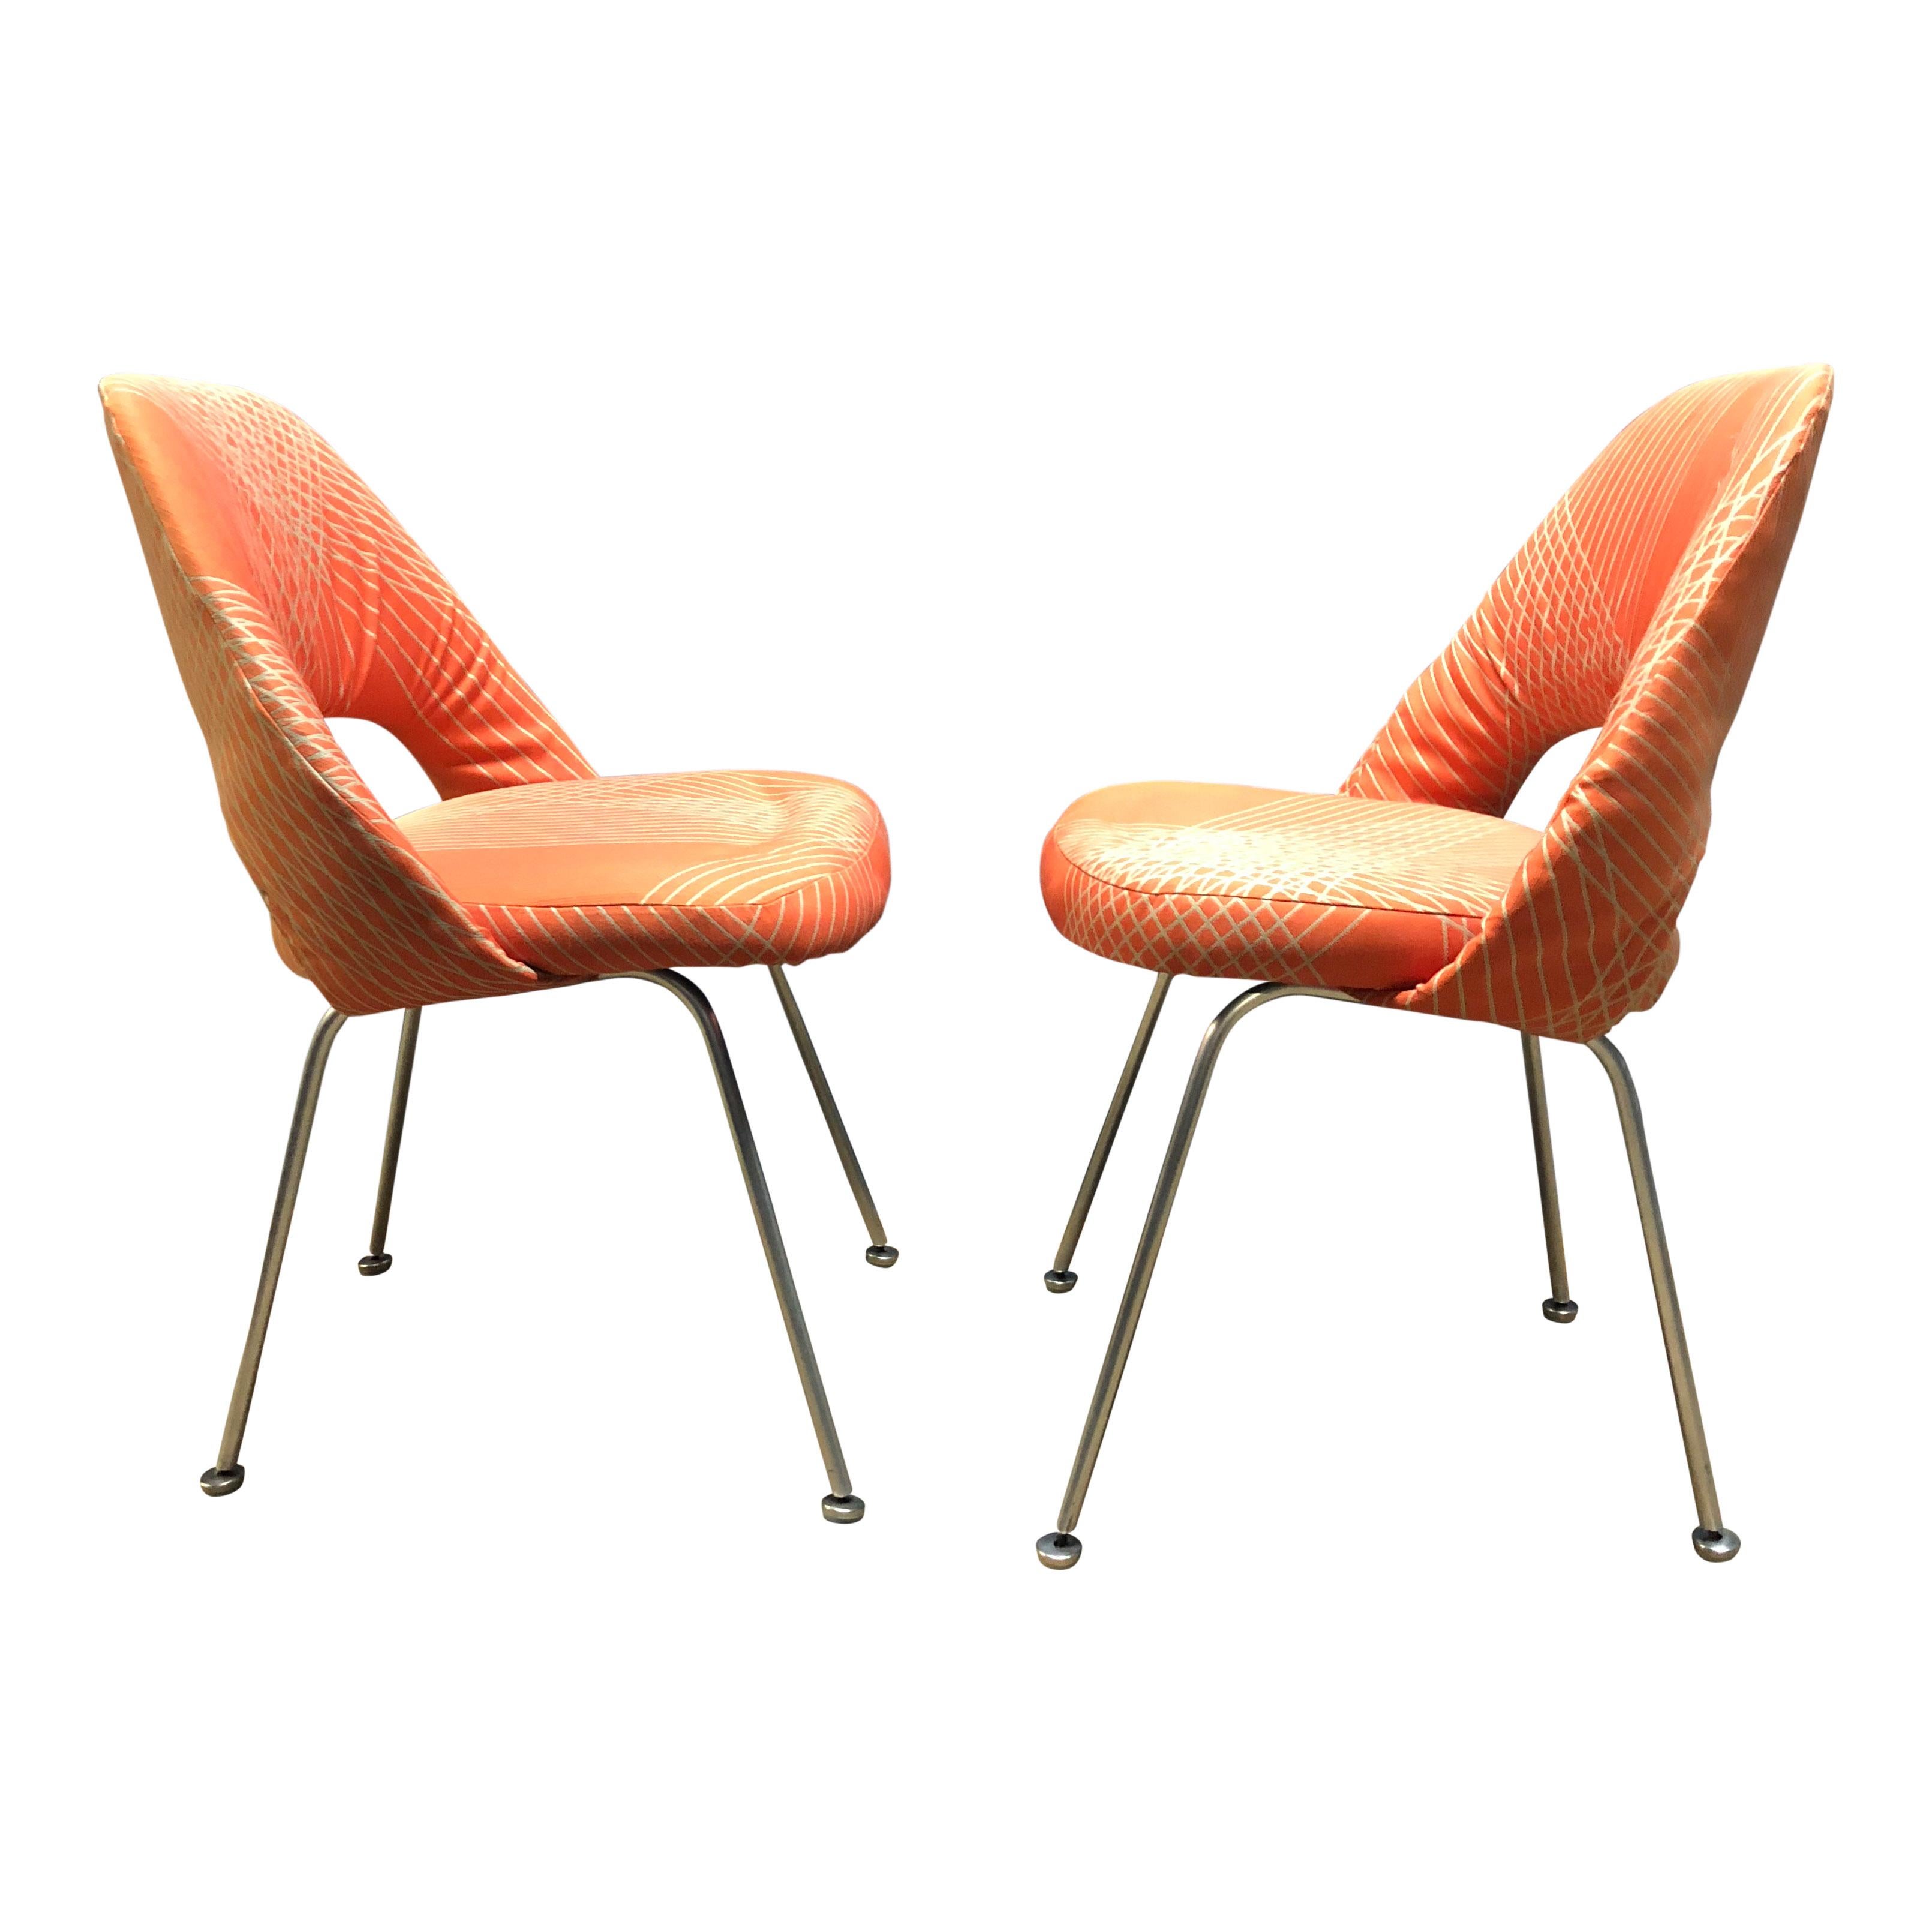 For your consideration are a pair of rare and early Eero Saarinen for Knoll side chairs.

These early production examples are evidenced by the unusual base structure and 